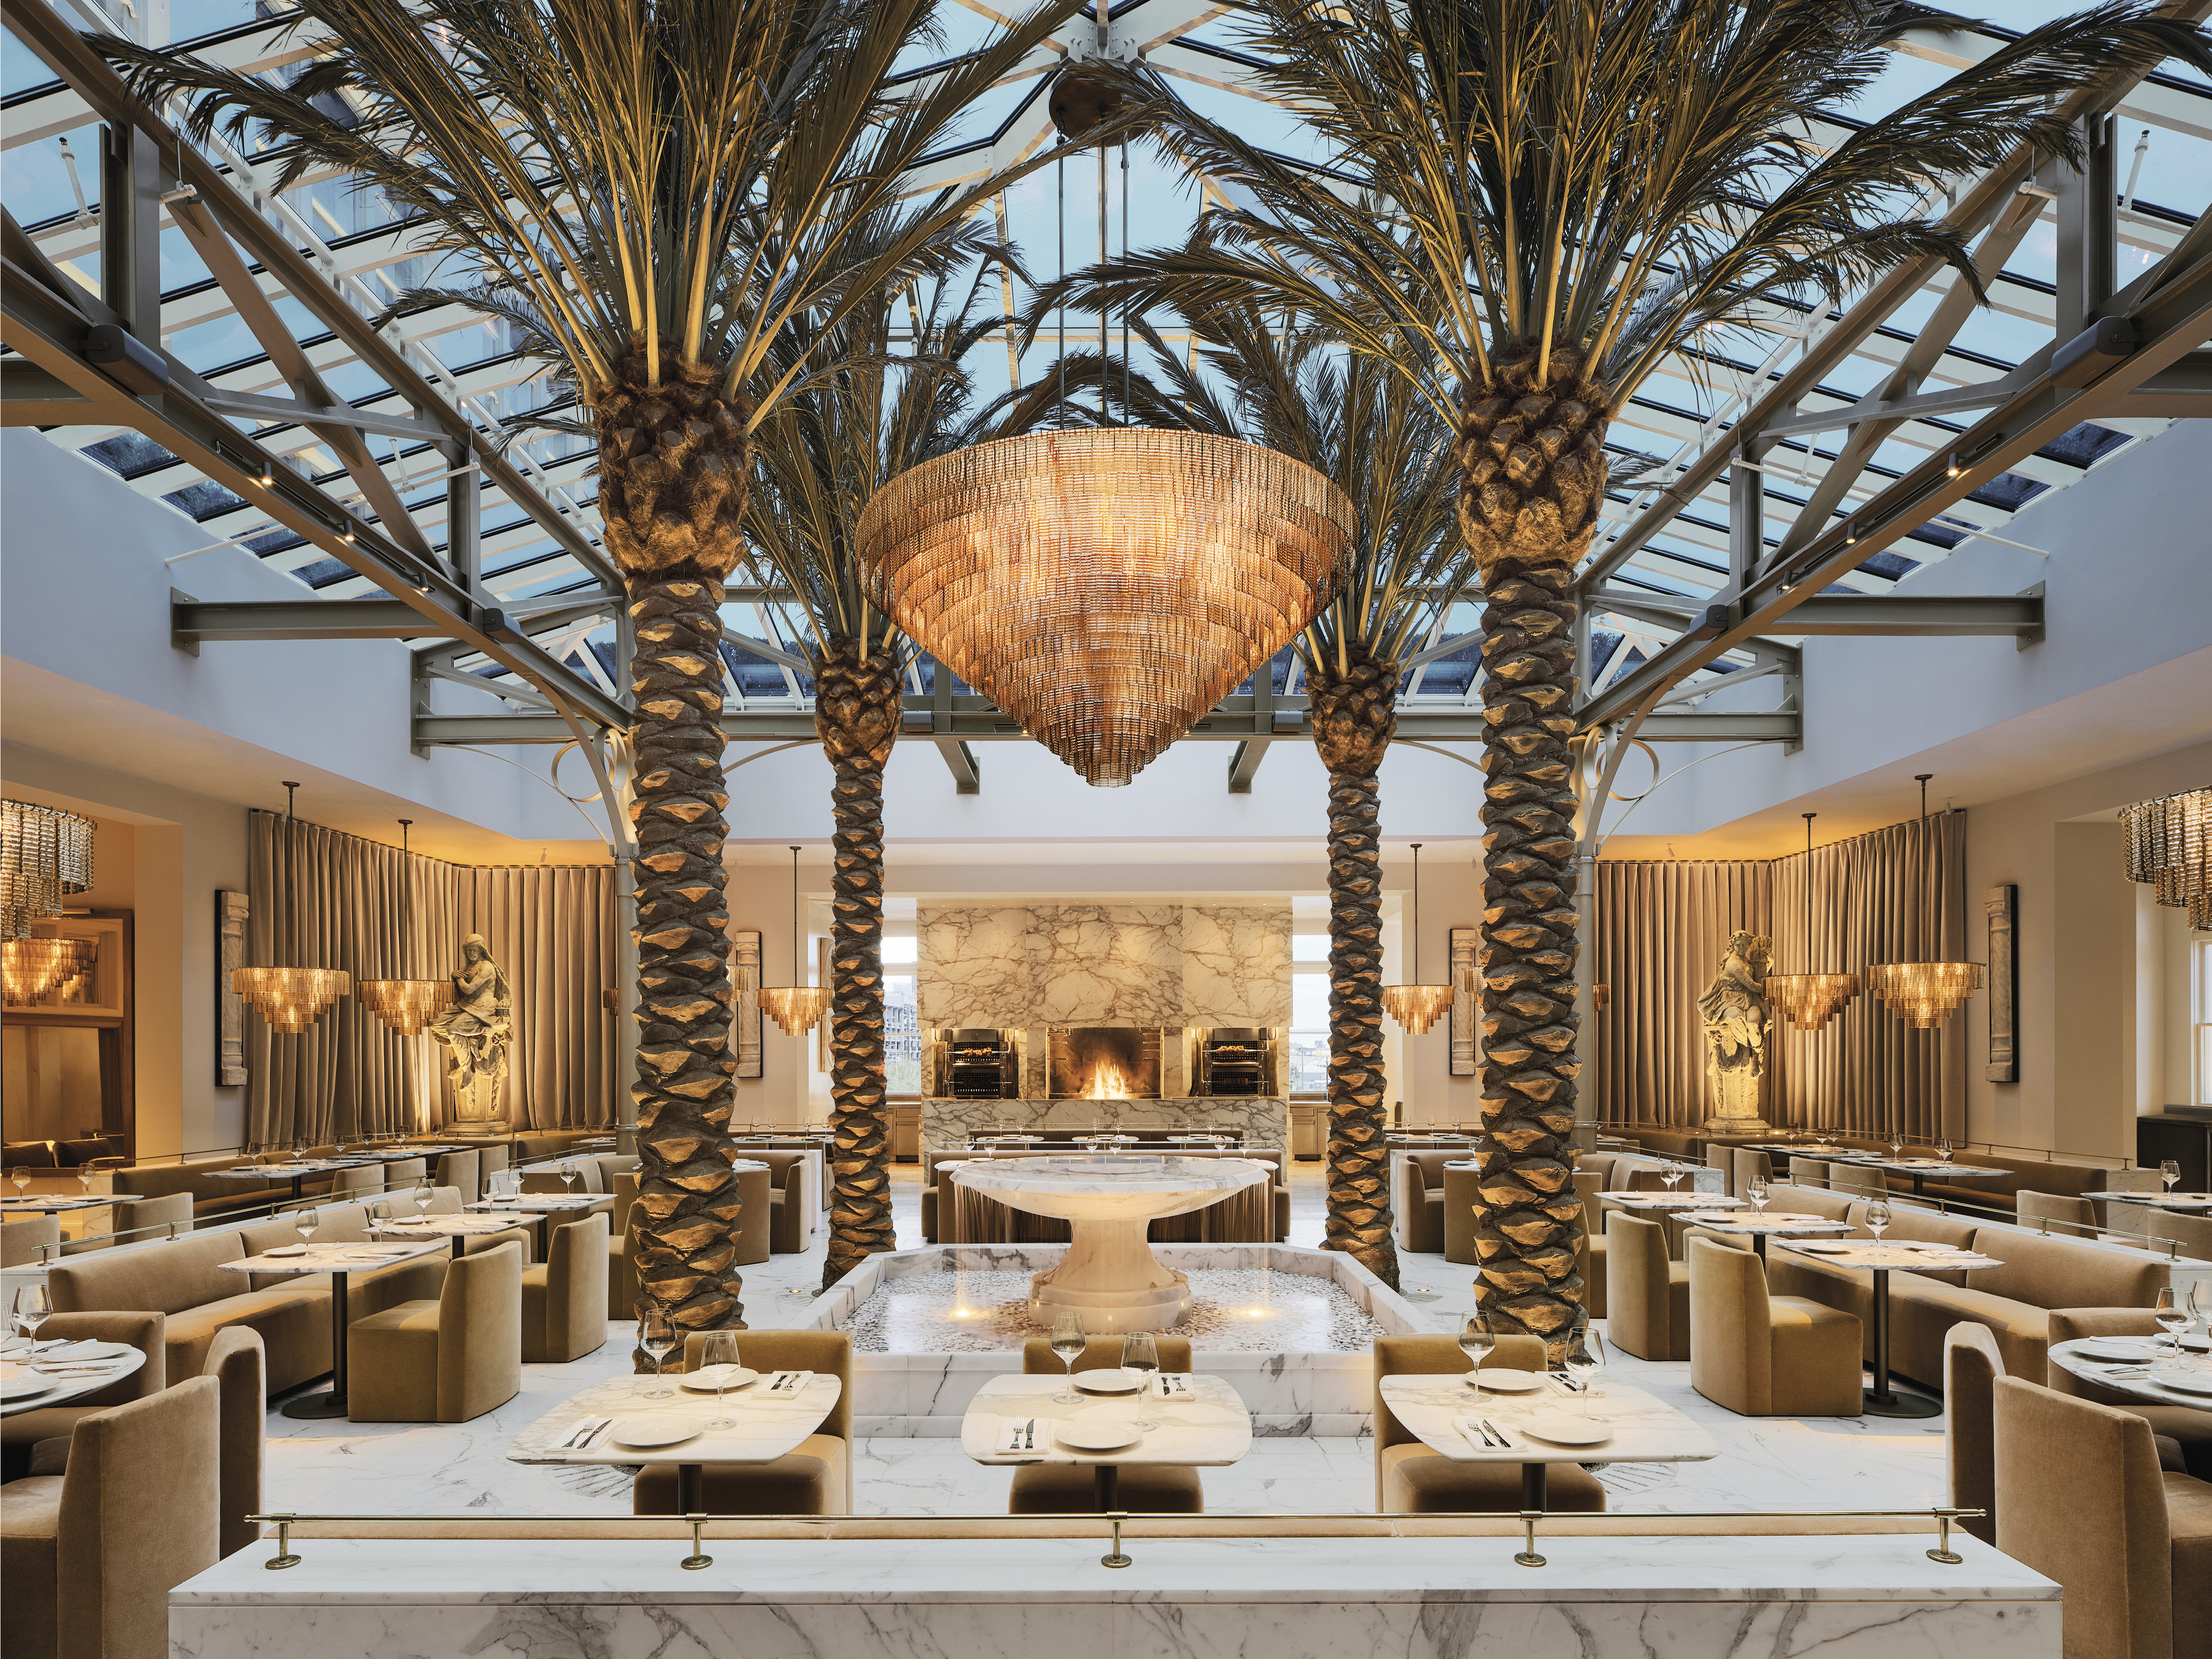 The Palm Court Restaurant including a fountain and four date palms in the center of the dining room.